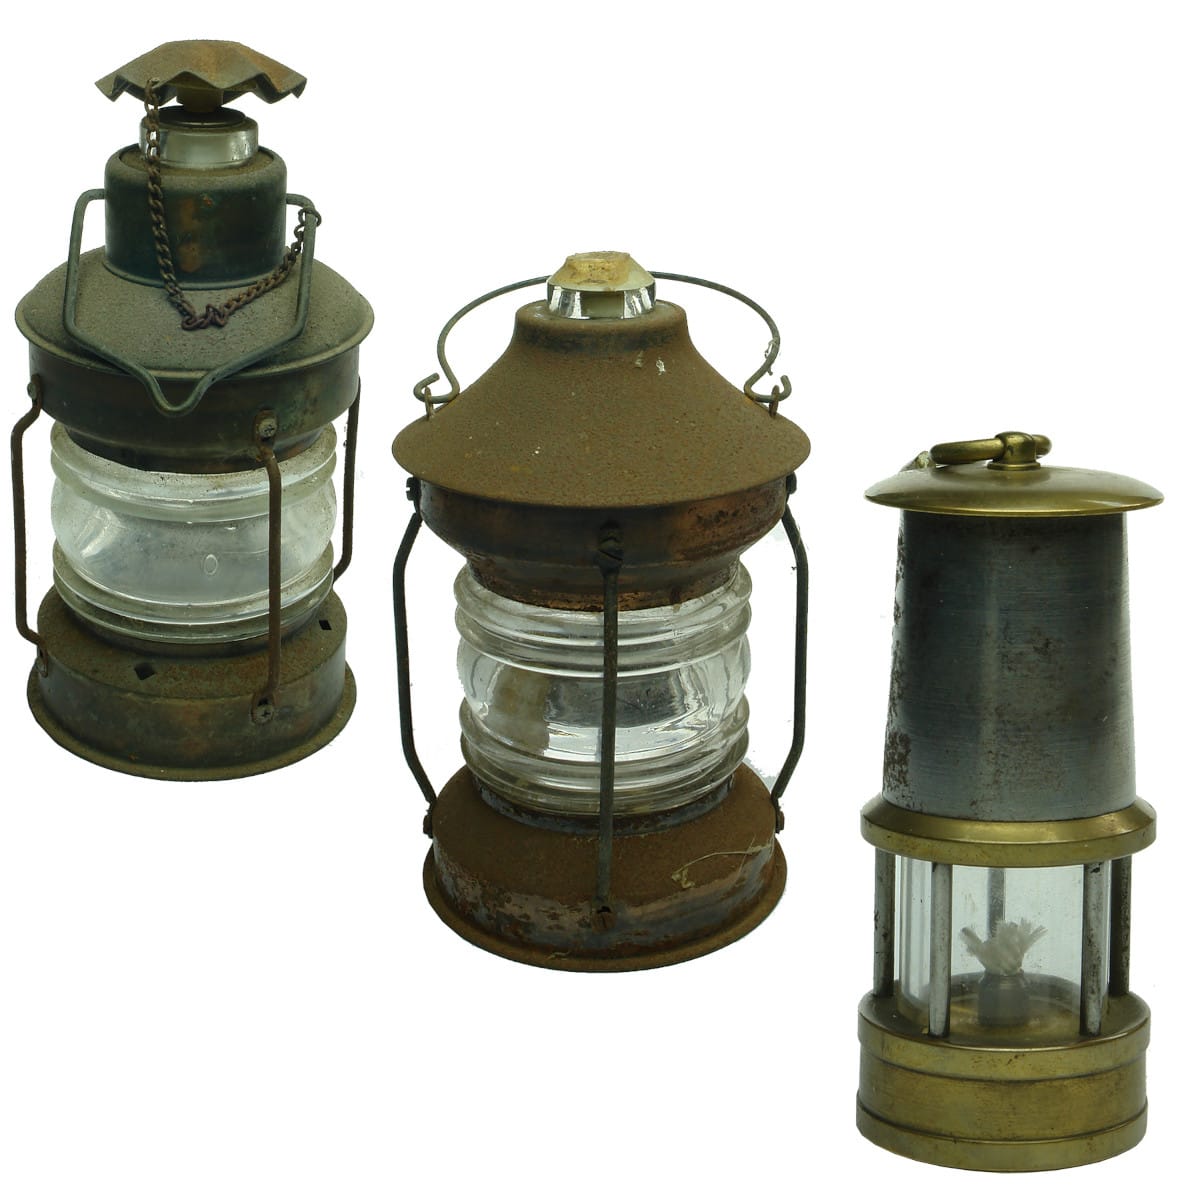 3 Lamps. 2 x Heavy glass bottle. Tin and copper; Small but very heavy brass and steel hanging lamp.